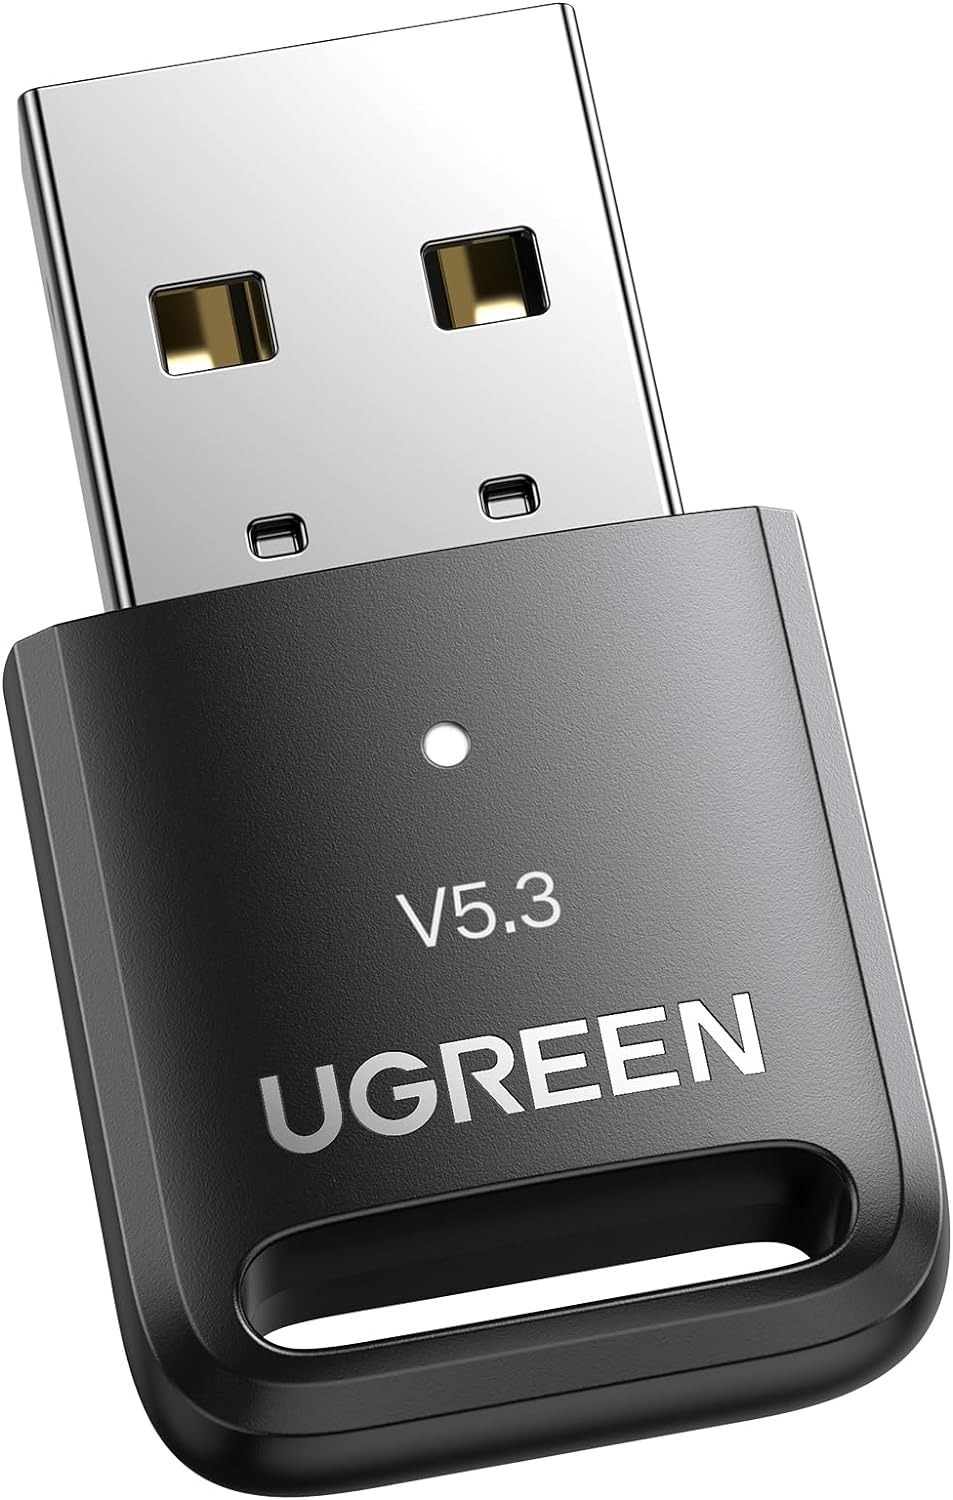 Prime Members: UGREEN Bluetooth 5.3 Adapter for PC $7 & More + Free Shipping w/ Prime or $35+